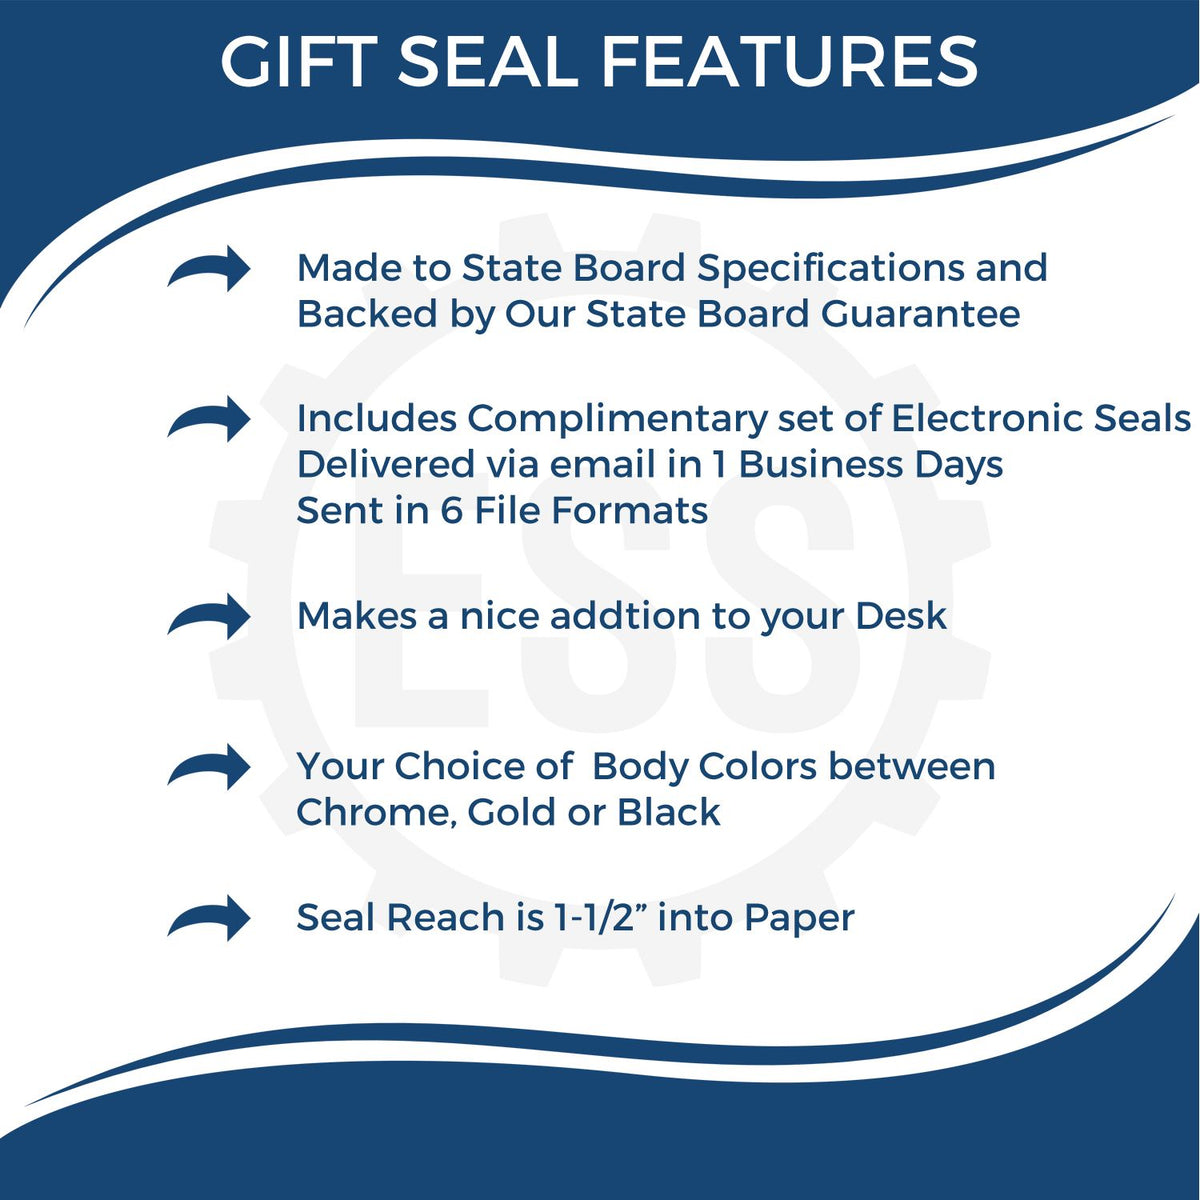 A picture of an infographic highlighting the selling points for the Gift Tennessee Architect Seal